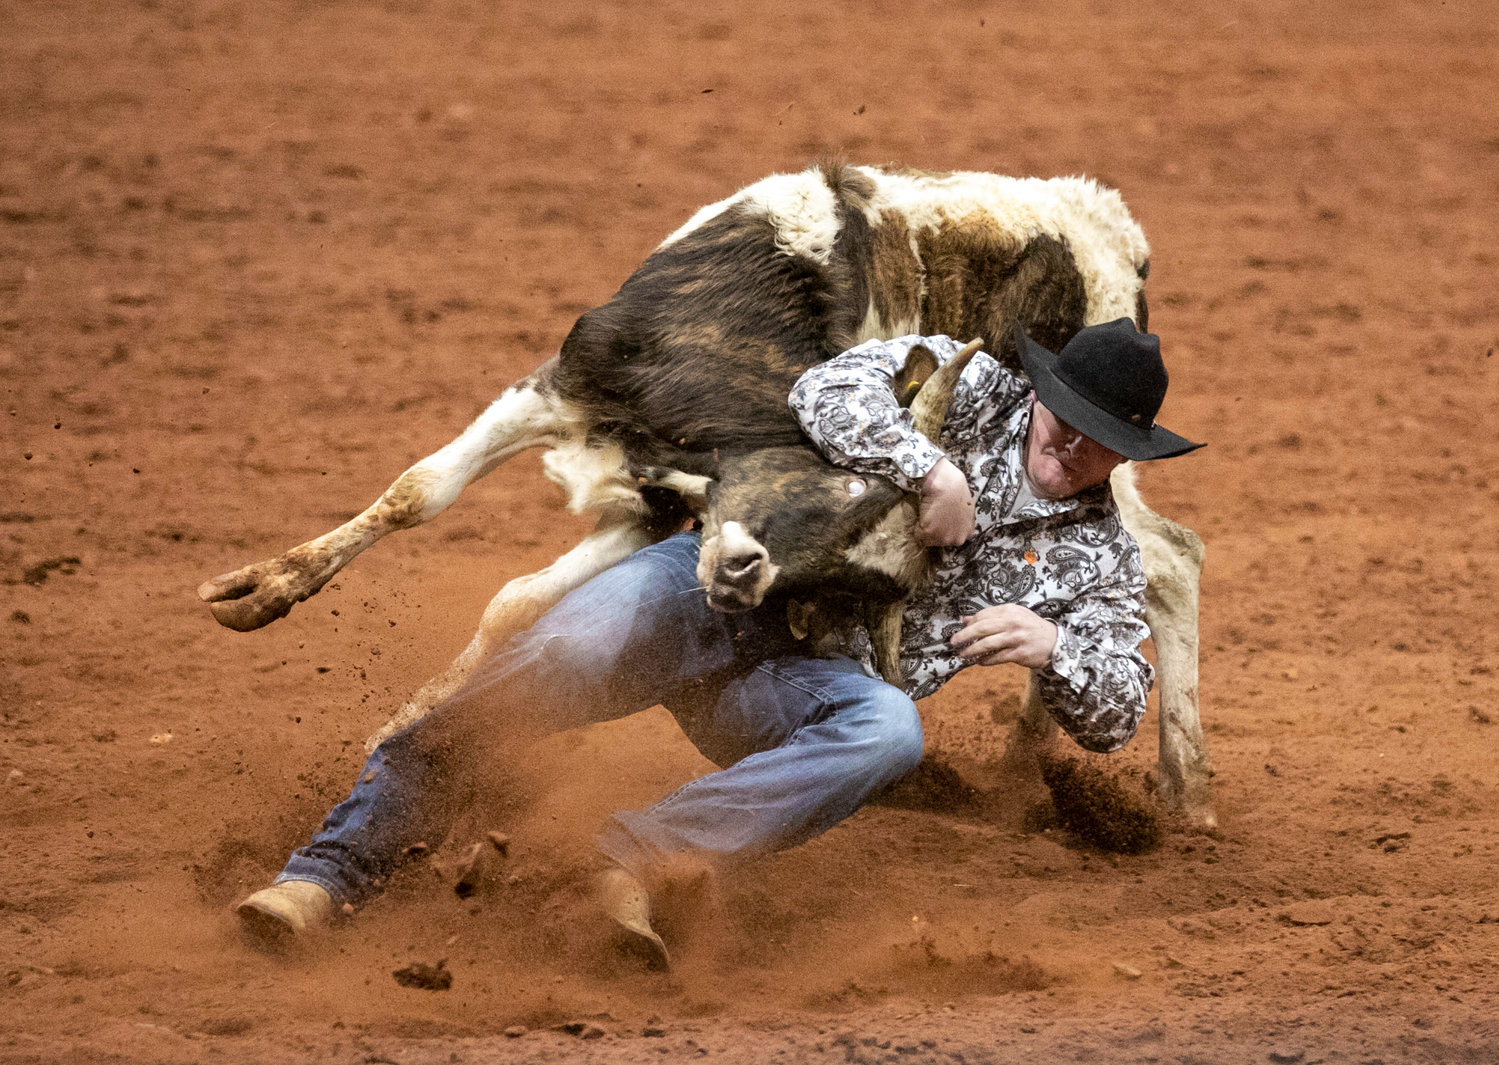 Kyle Cook wrestles a steer to the ground to score points in the Saturday night event as part of the 23rd annual Professional Cowboy Association rodeo at the Baldwin County Coliseum. Hosted by the Robertsdale Rotary Club, the two-night rodeo serves as the season-opening event for PCA’s 2023-2024 campaign.